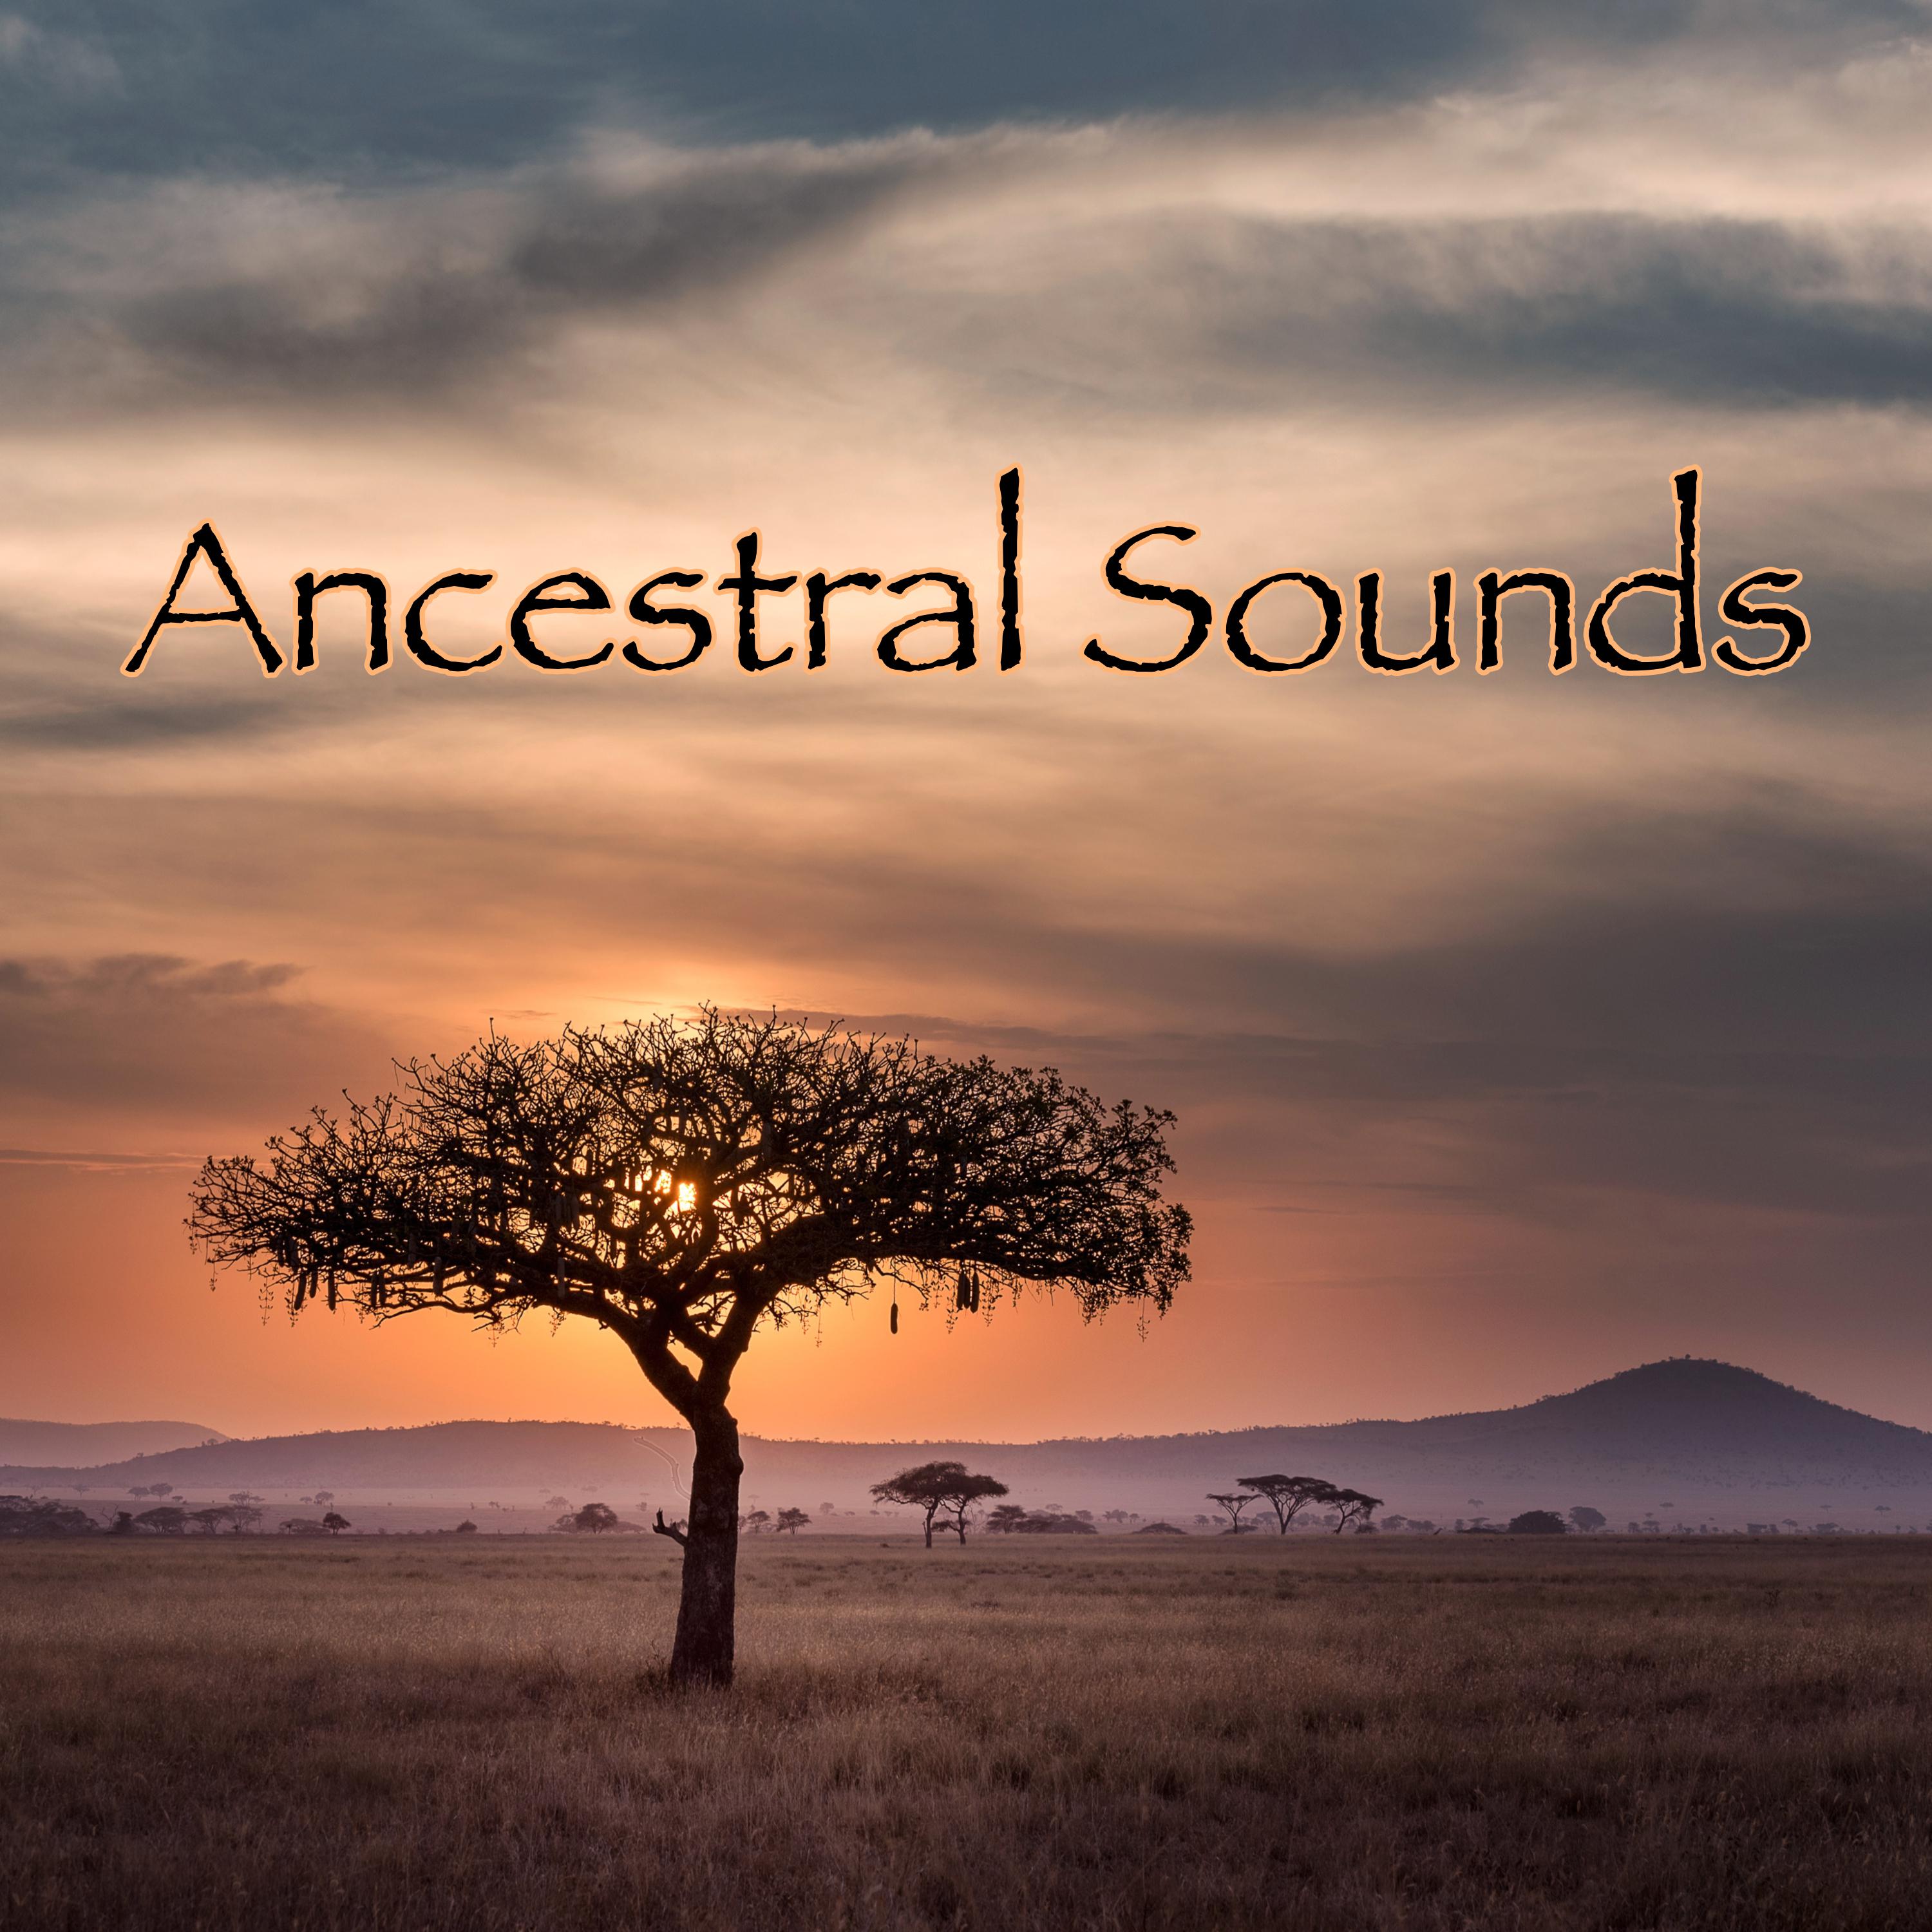 Ancestral Sounds – Tabla, Flutes, Drums and Other Ethno Music for Self Awakening